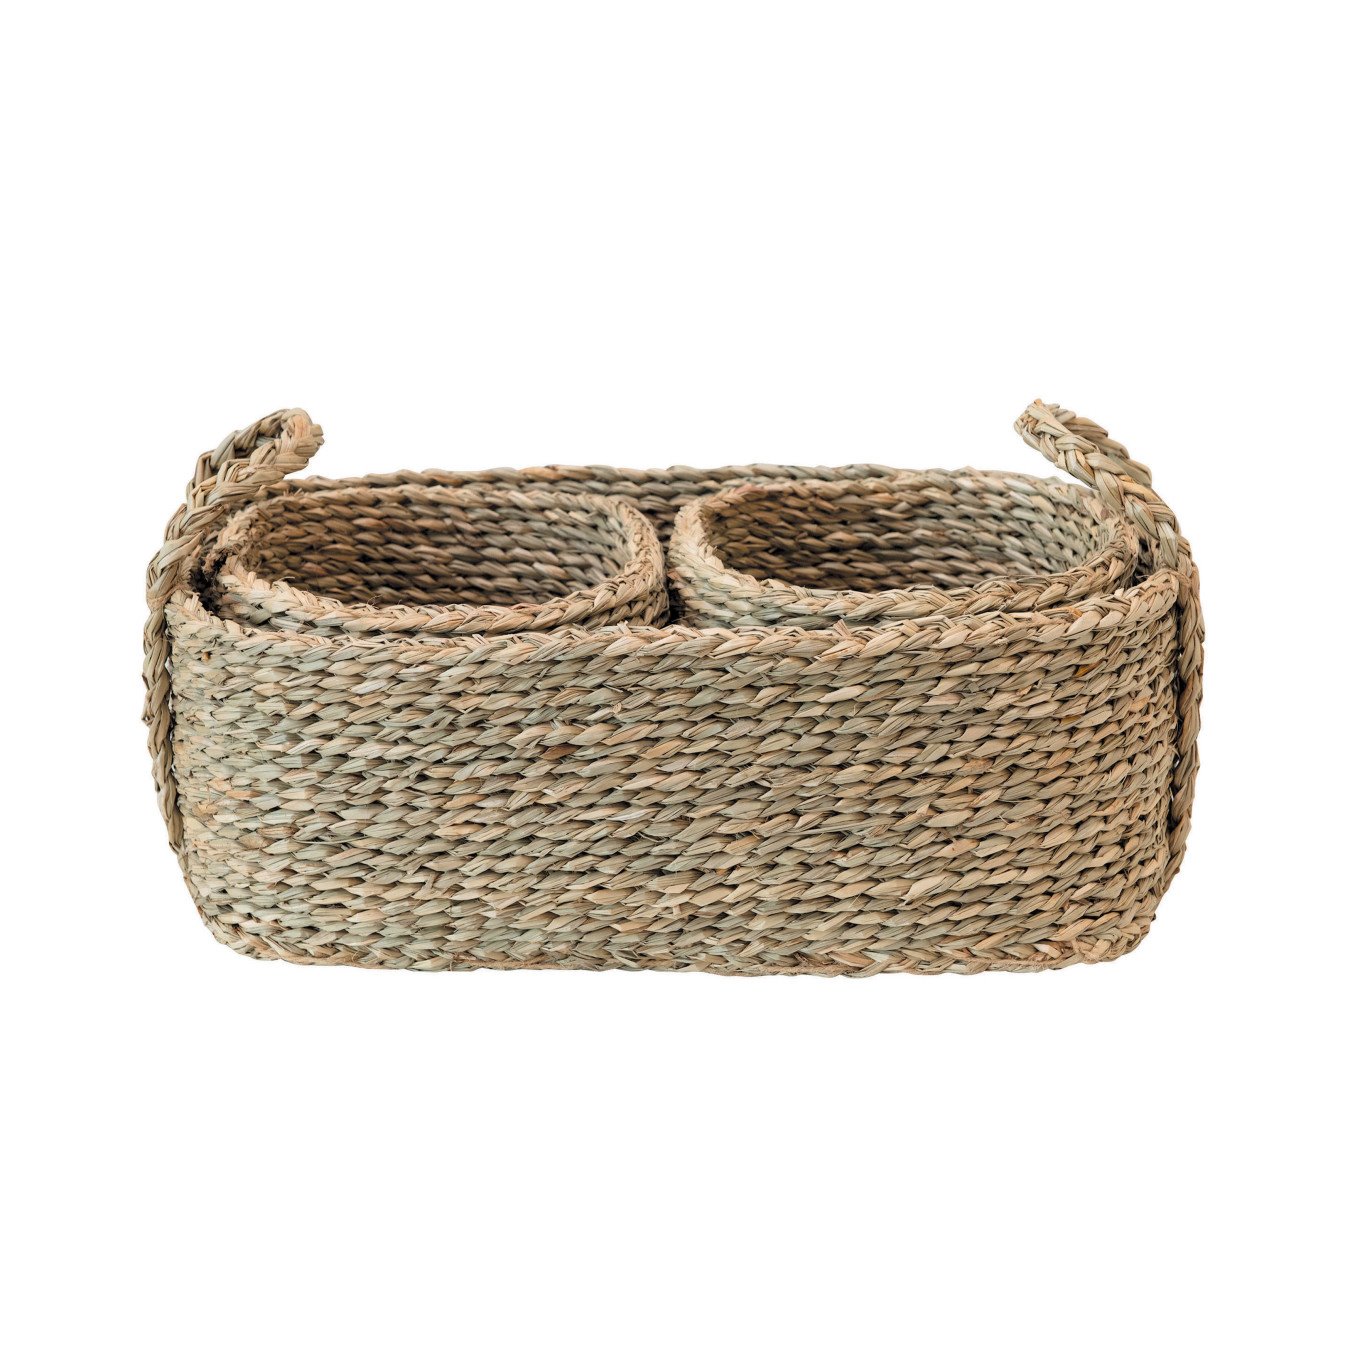 Hand-Woven Seagrass Nested Baskets, Natural, Set of 3